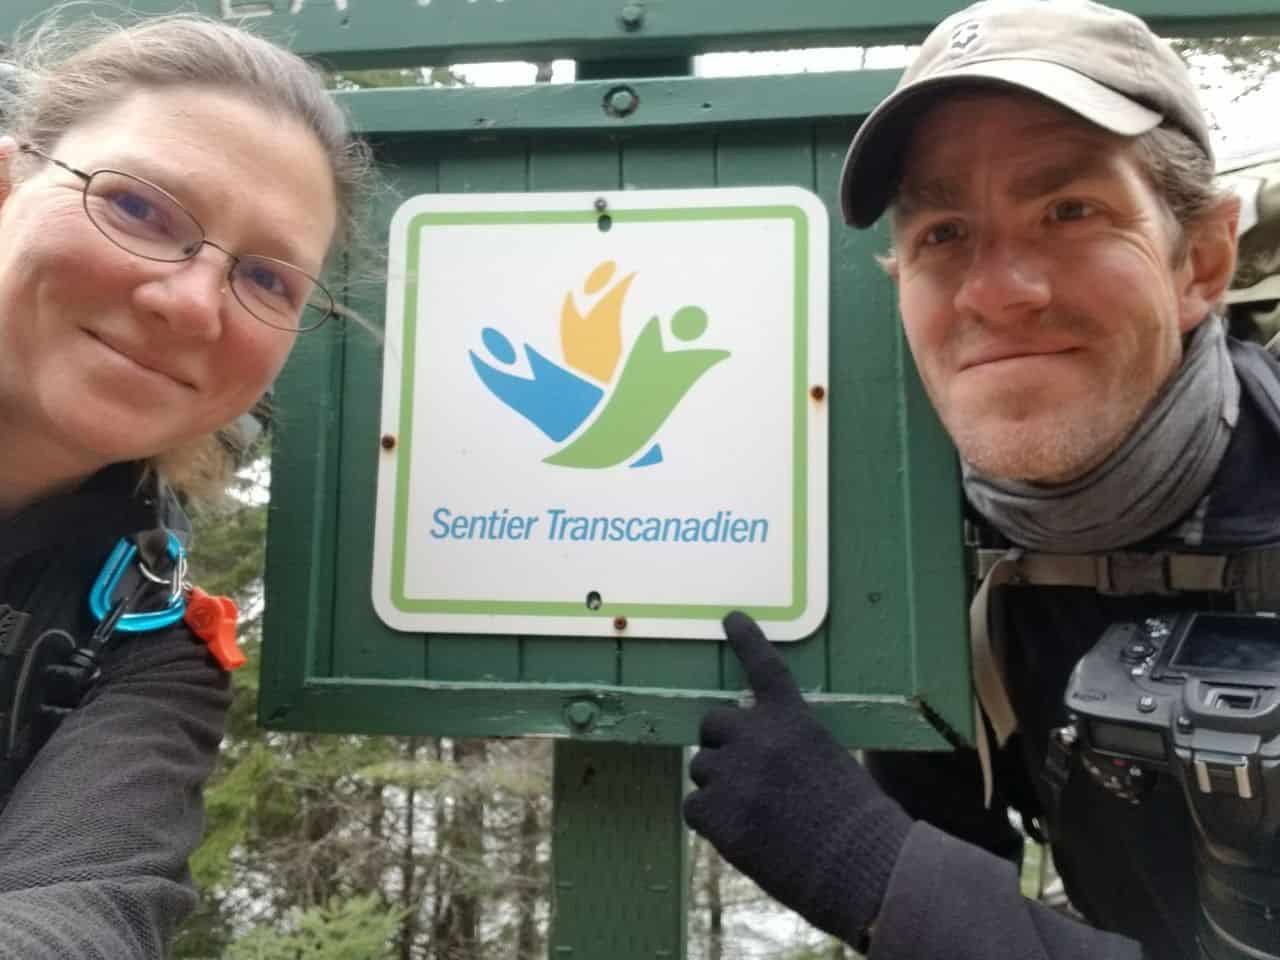 Sonya and Sean on  the Sentier Transcanadien, one of the best trails in Quebec Canada